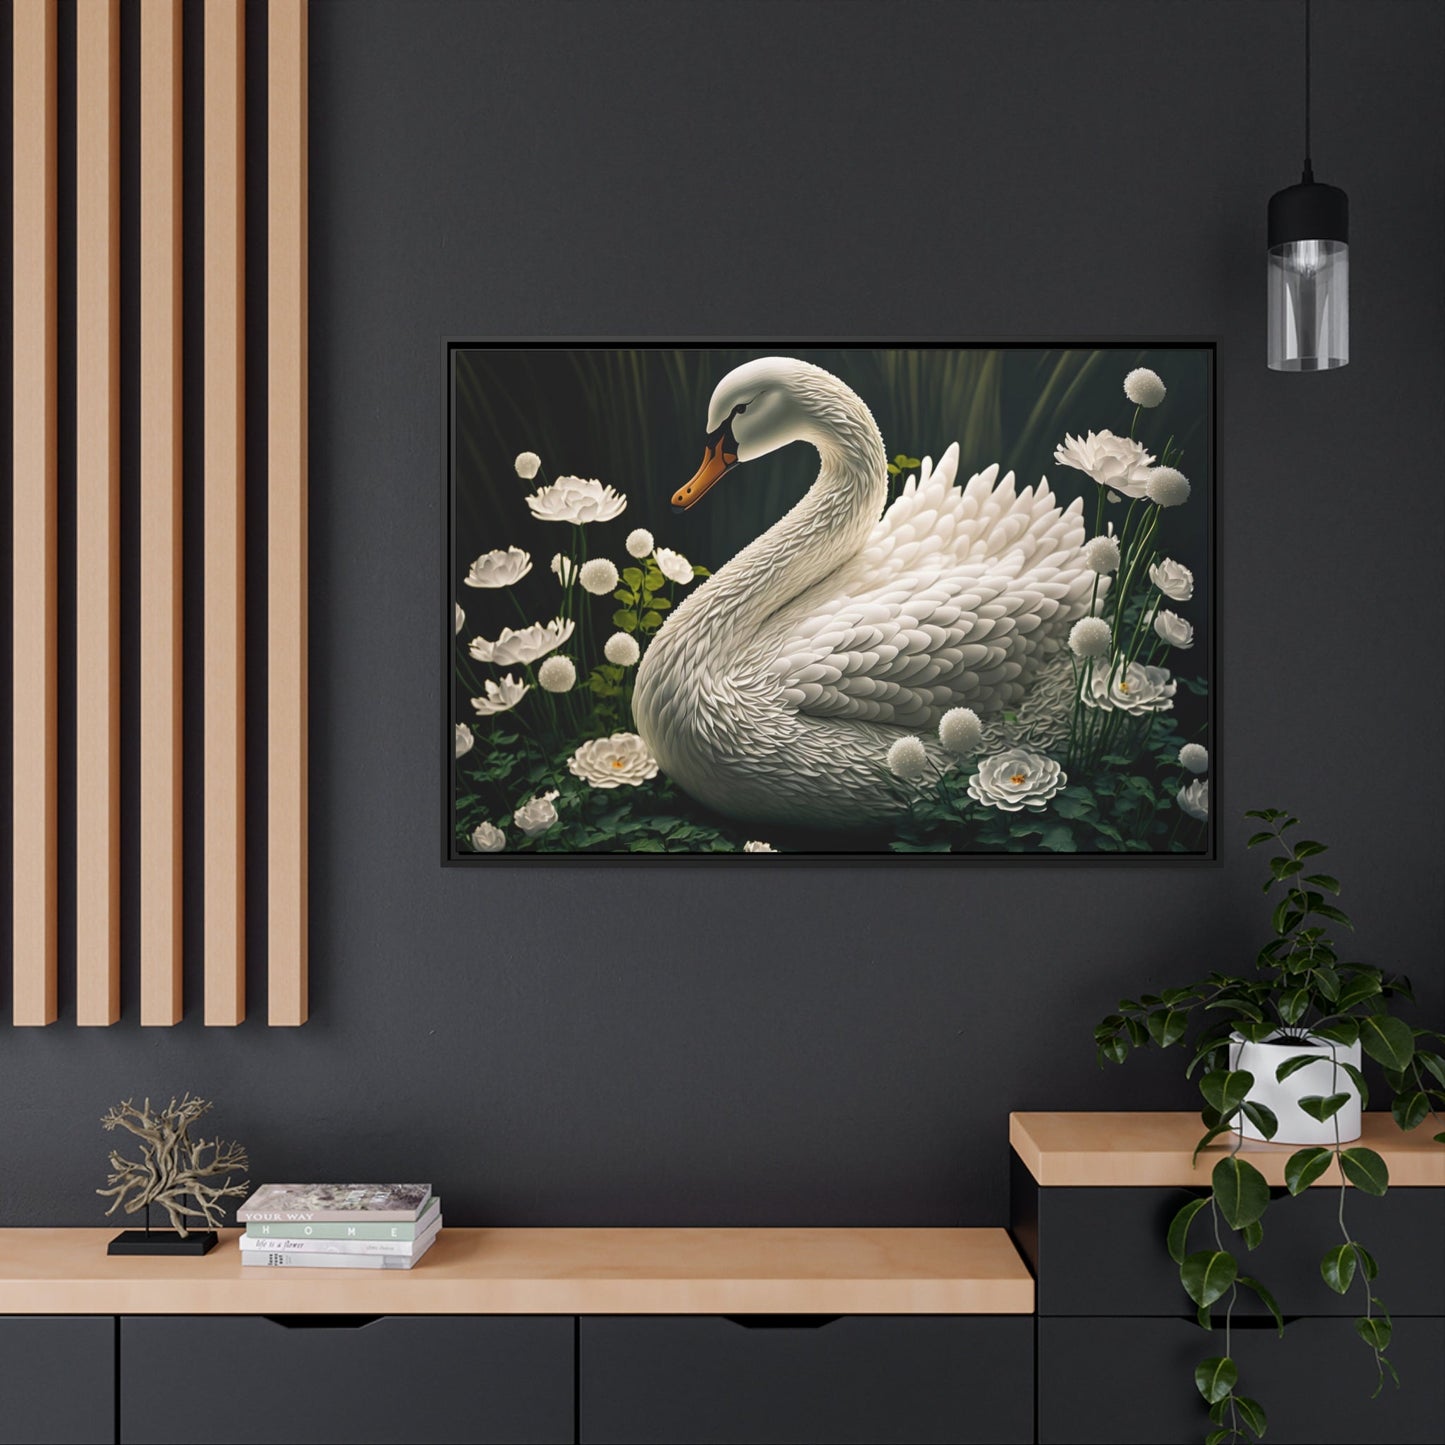 Graceful Elegance: Wall Art Celebrating the Beauty and Poise of Swan